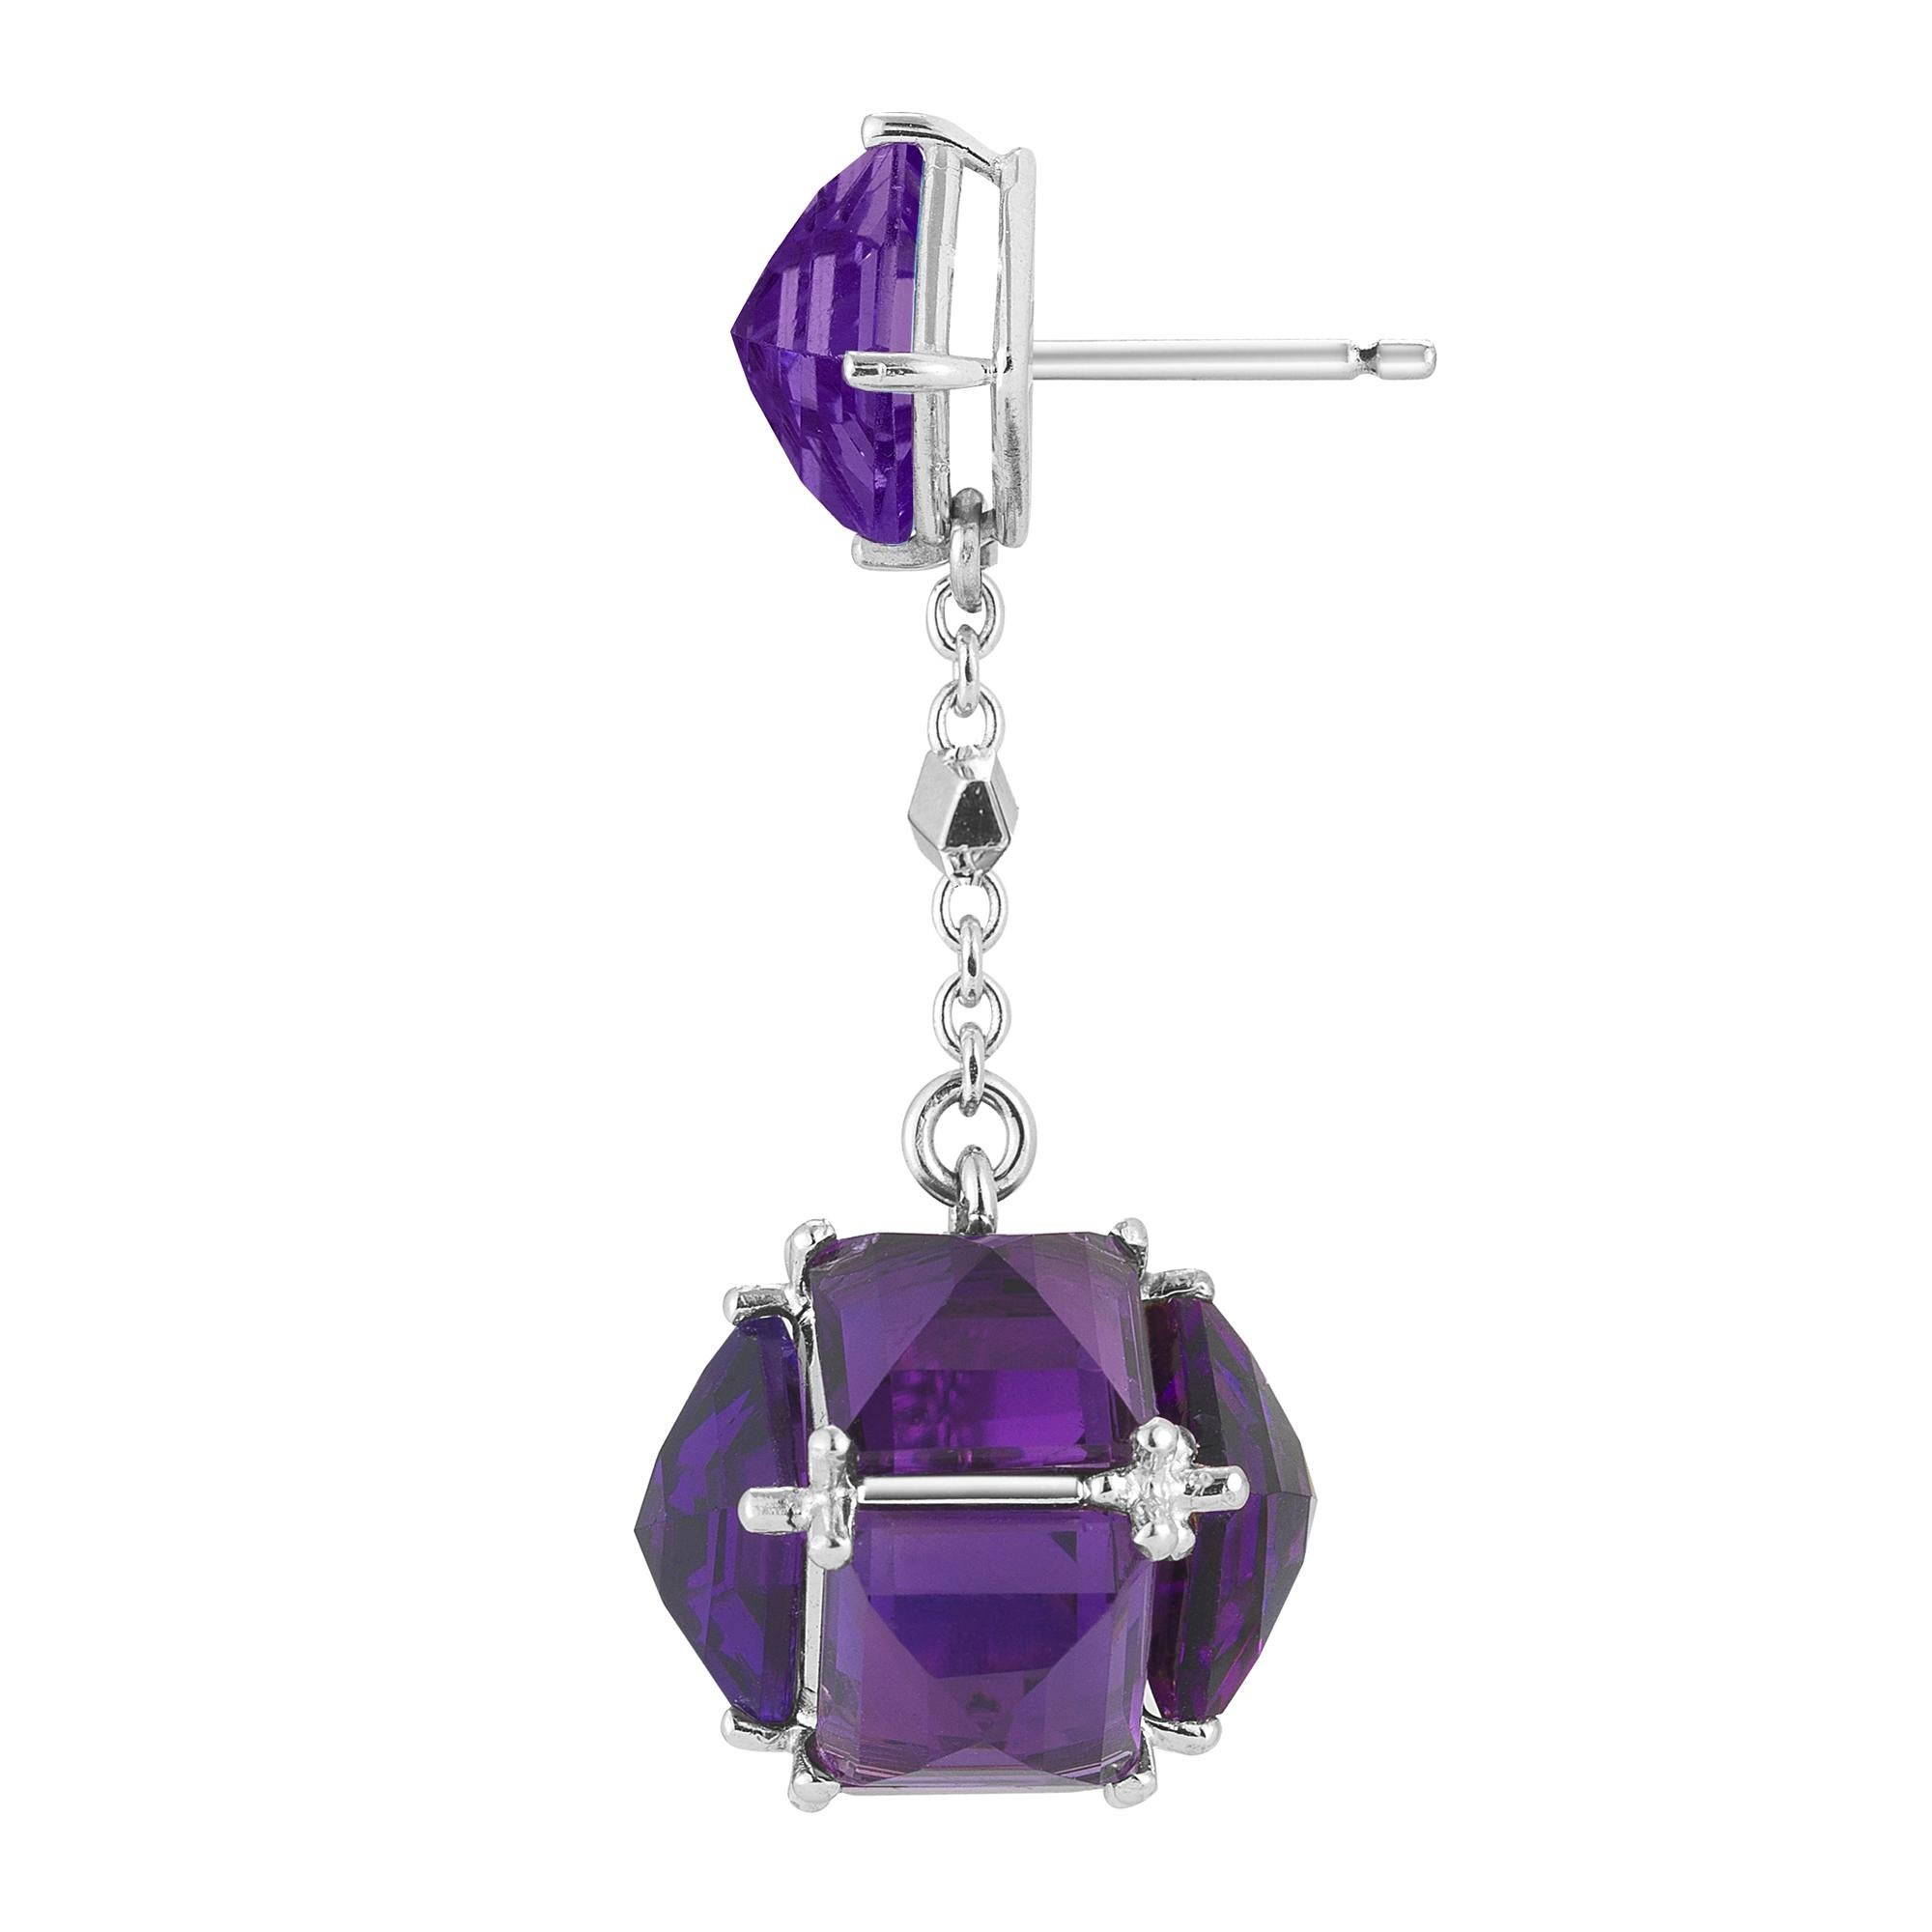 18kt white gold Very PC® earrings with reverse set emerald-cut amethyst and signature Brillante® motif.

Staying true to Paolo Costagli’s appreciation for modern and clean geometries, the Very PC® collection embodies bold angles of reverse-set